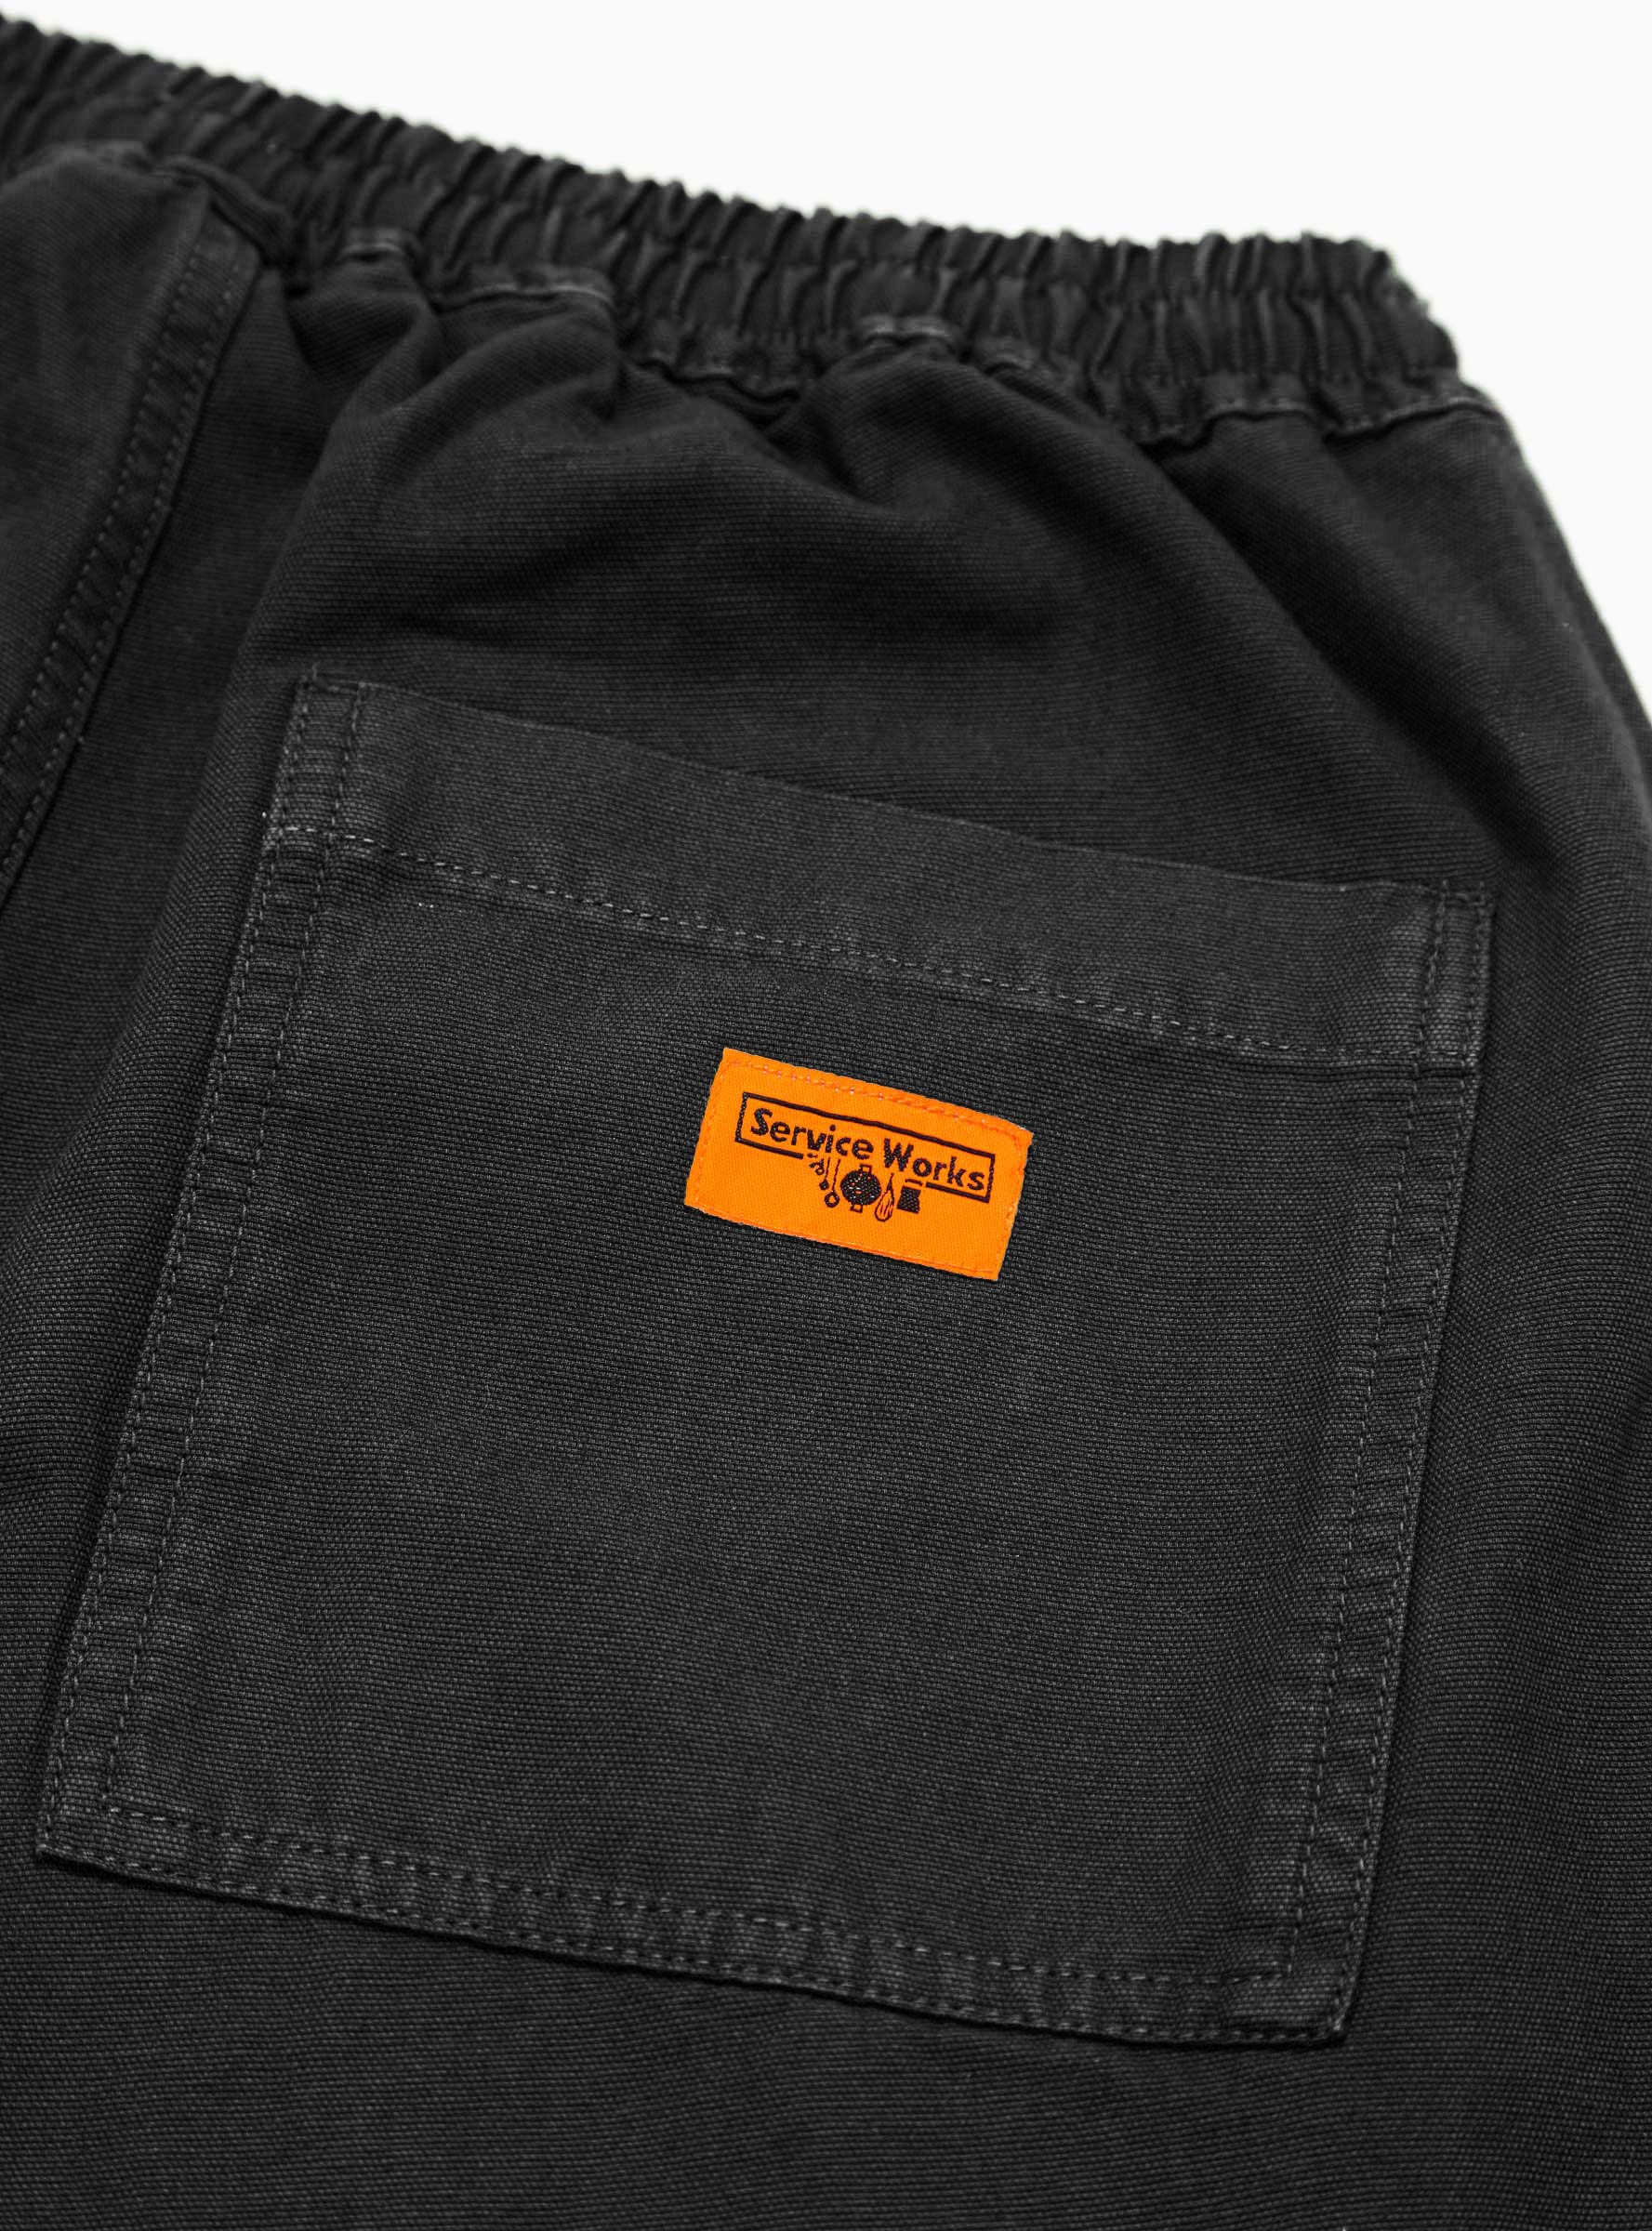 Service Works Service Works Classic Chef Trousers Black - Size: XL